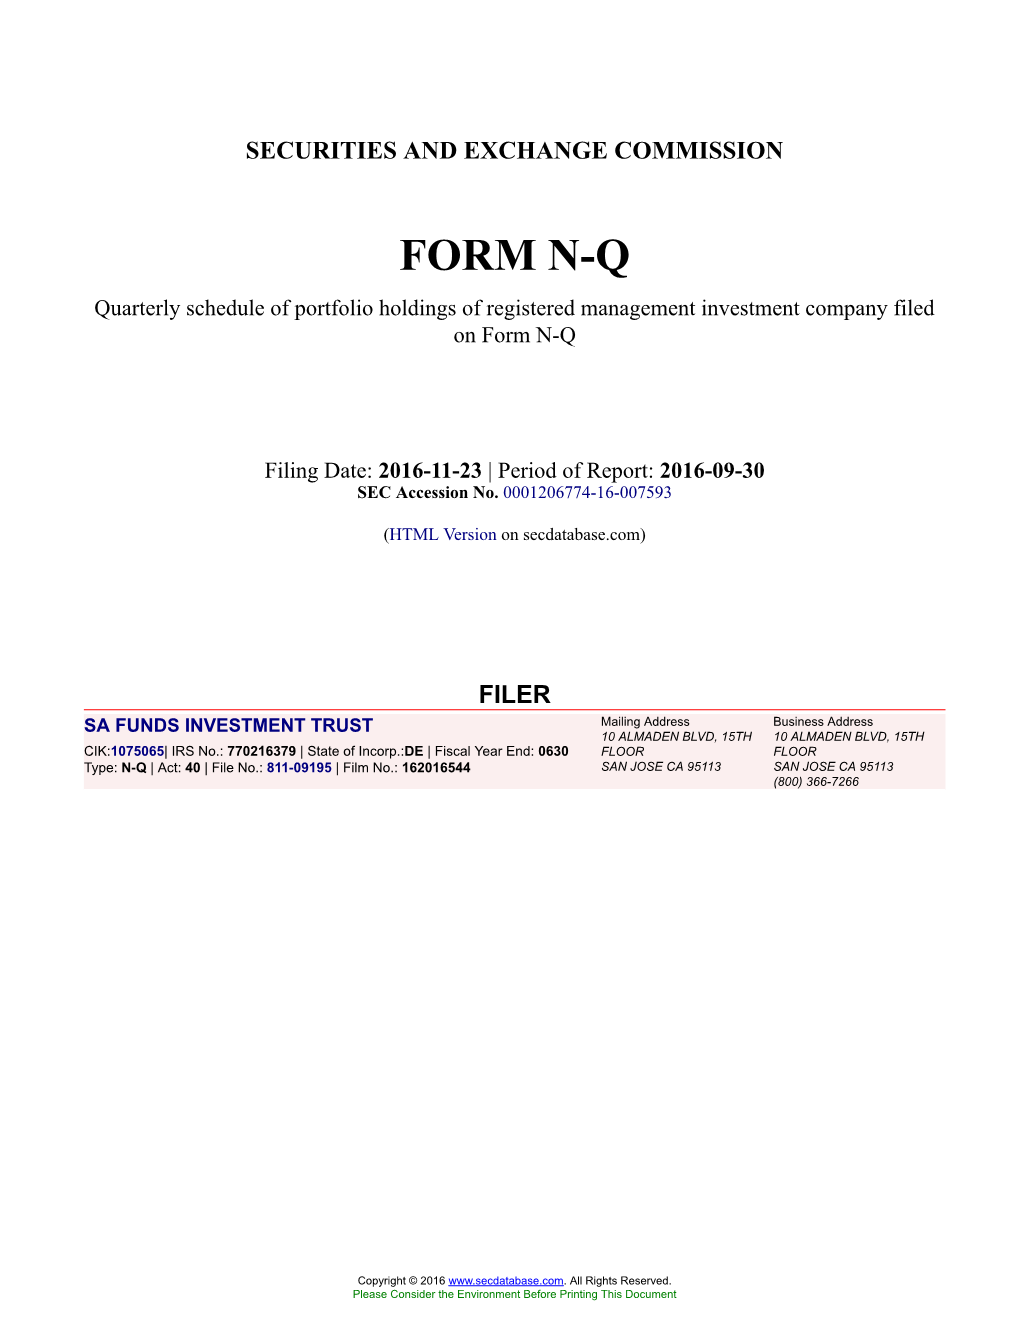 SA FUNDS INVESTMENT TRUST Form N-Q Filed 2016-11-23